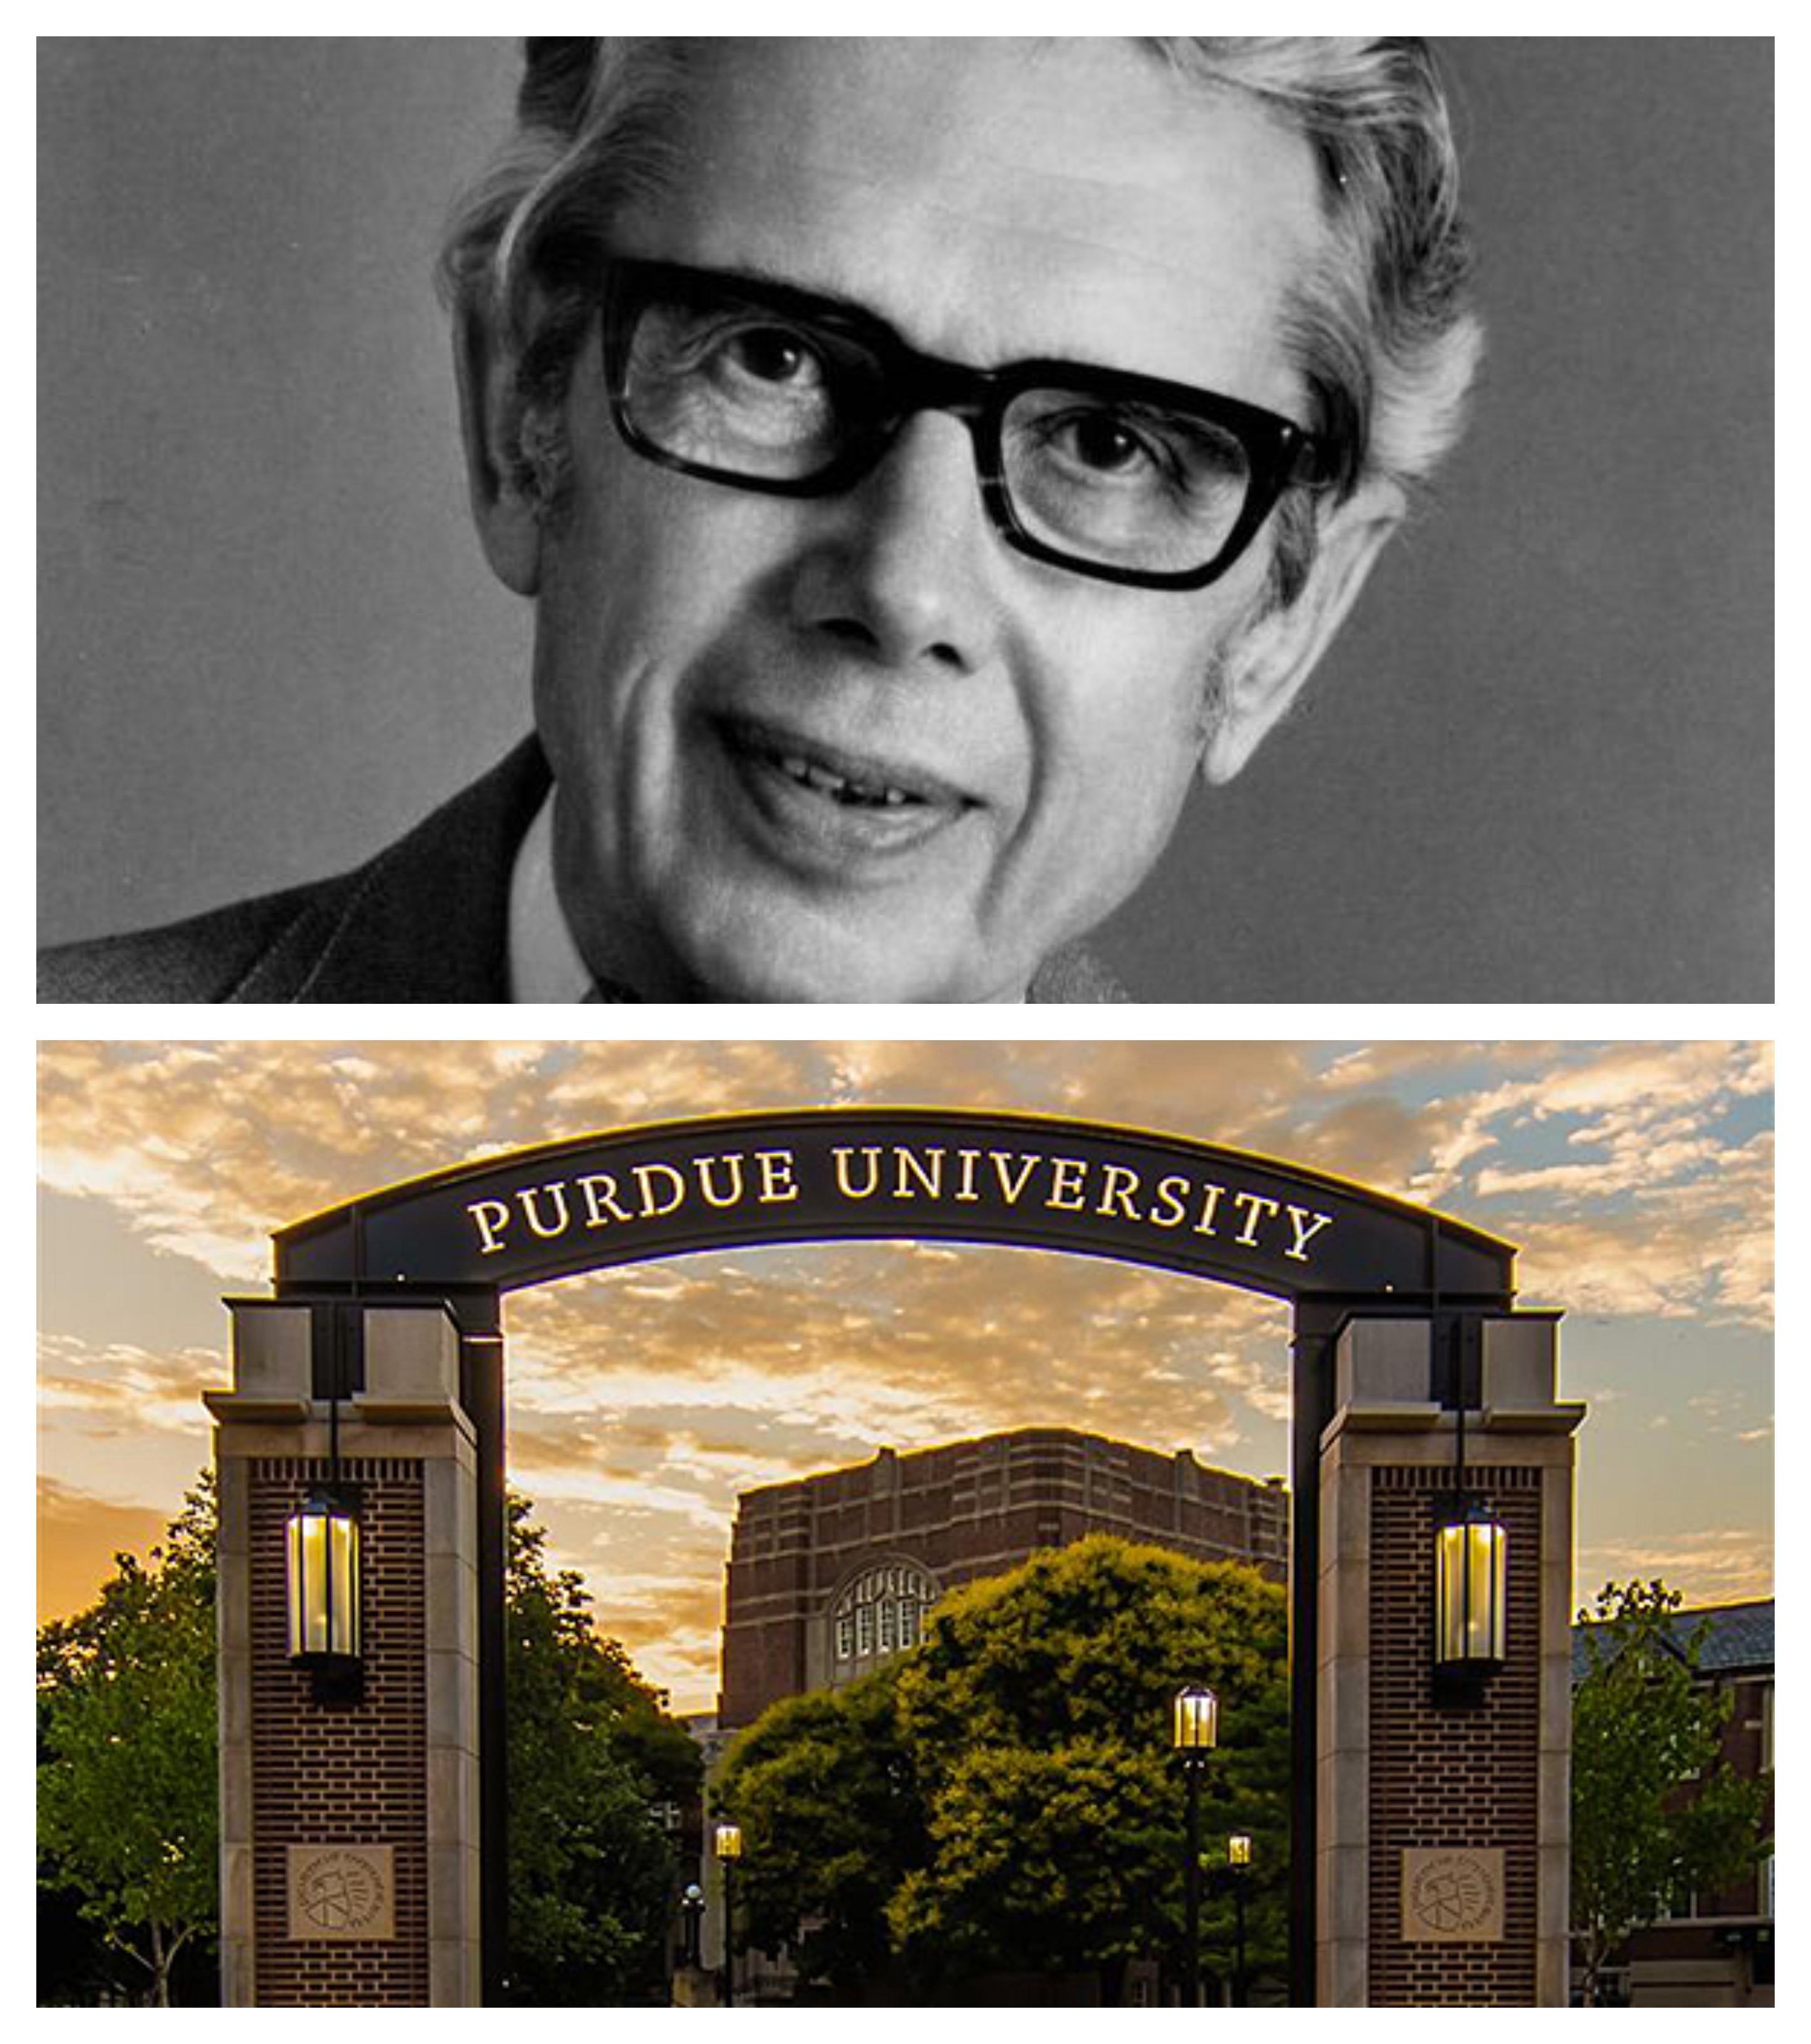 Purdue University's "Top Of The Crop" Scholarship Is Awarded In Honor Of Which Famous Alumnus